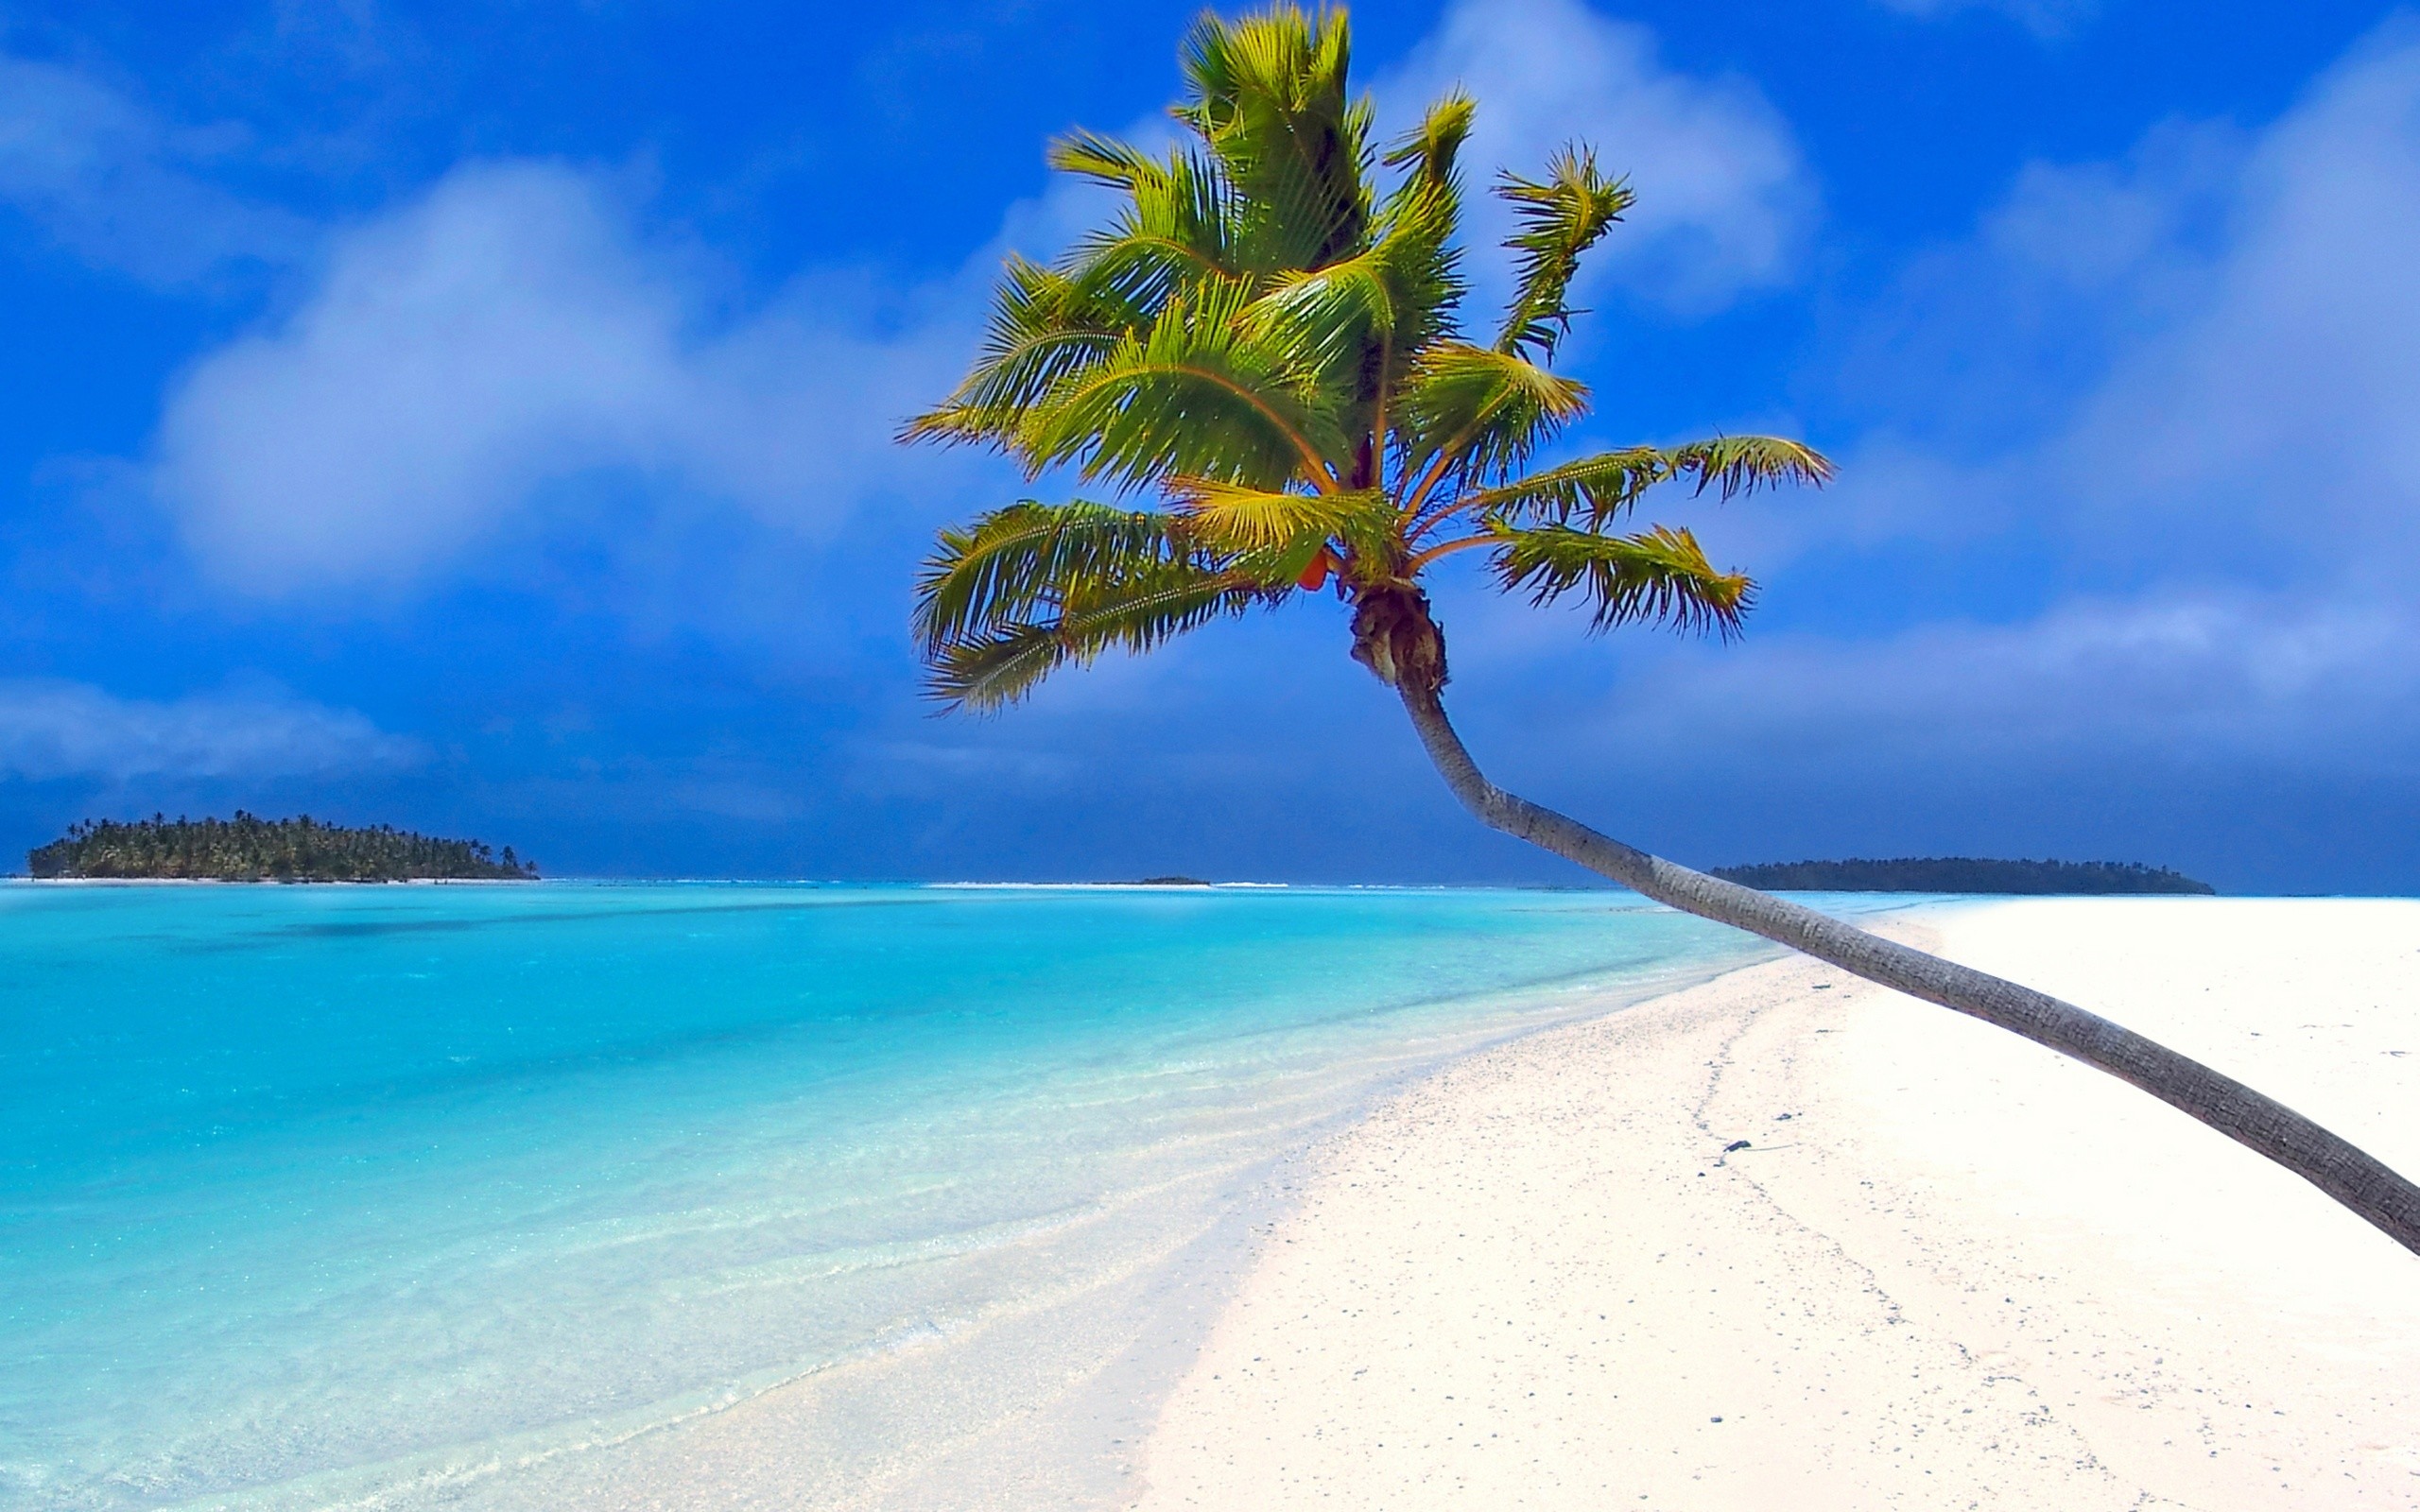 2560x1600 Palm Tree Wallpapers 22015